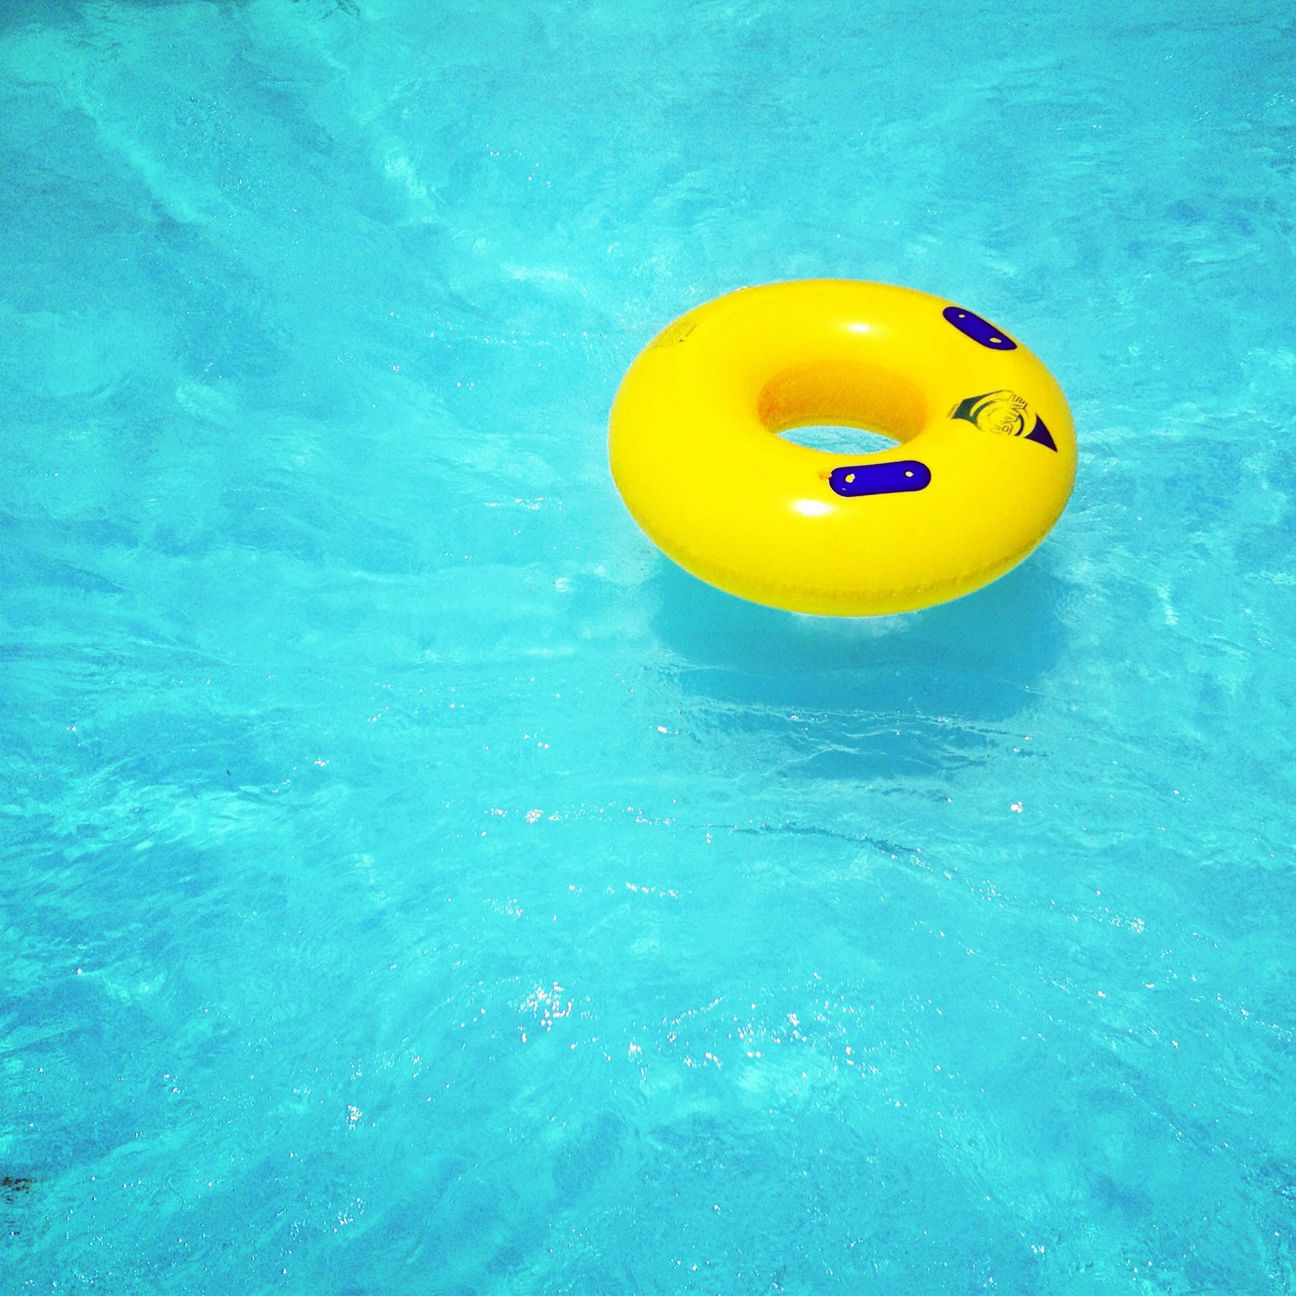 blue, yellow, water, swimming pool, circle, close-up, high angle view, waterfront, ball, multi colored, turquoise colored, single object, childhood, no people, toy, orange color, geometric shape, sport, wall - building feature, rippled